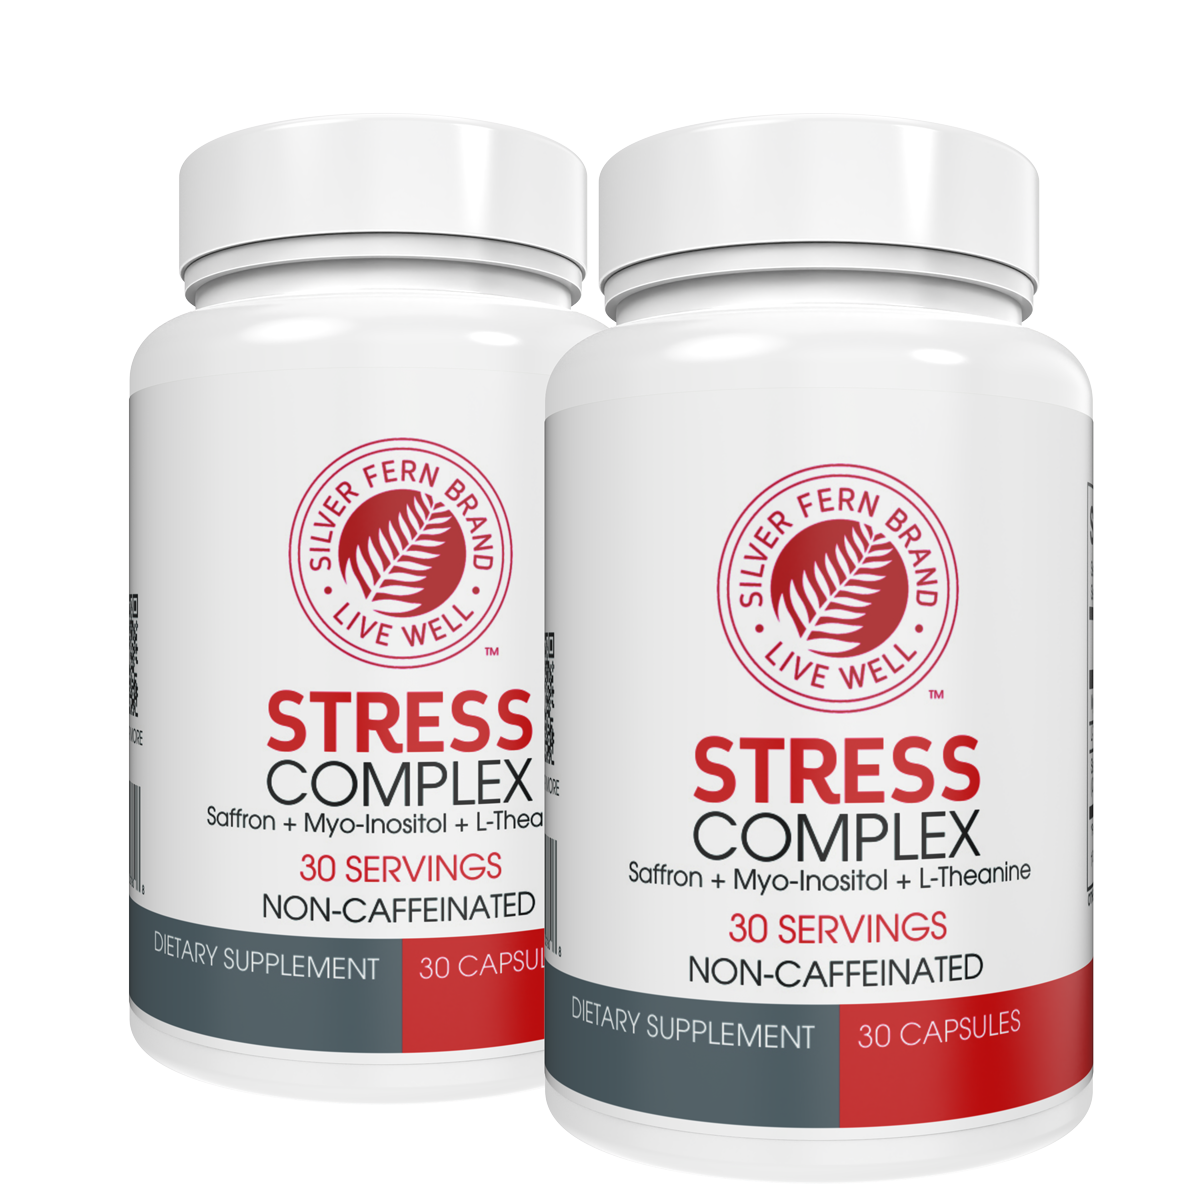 Stress Complex - Sleep, Worry, Mood and More!